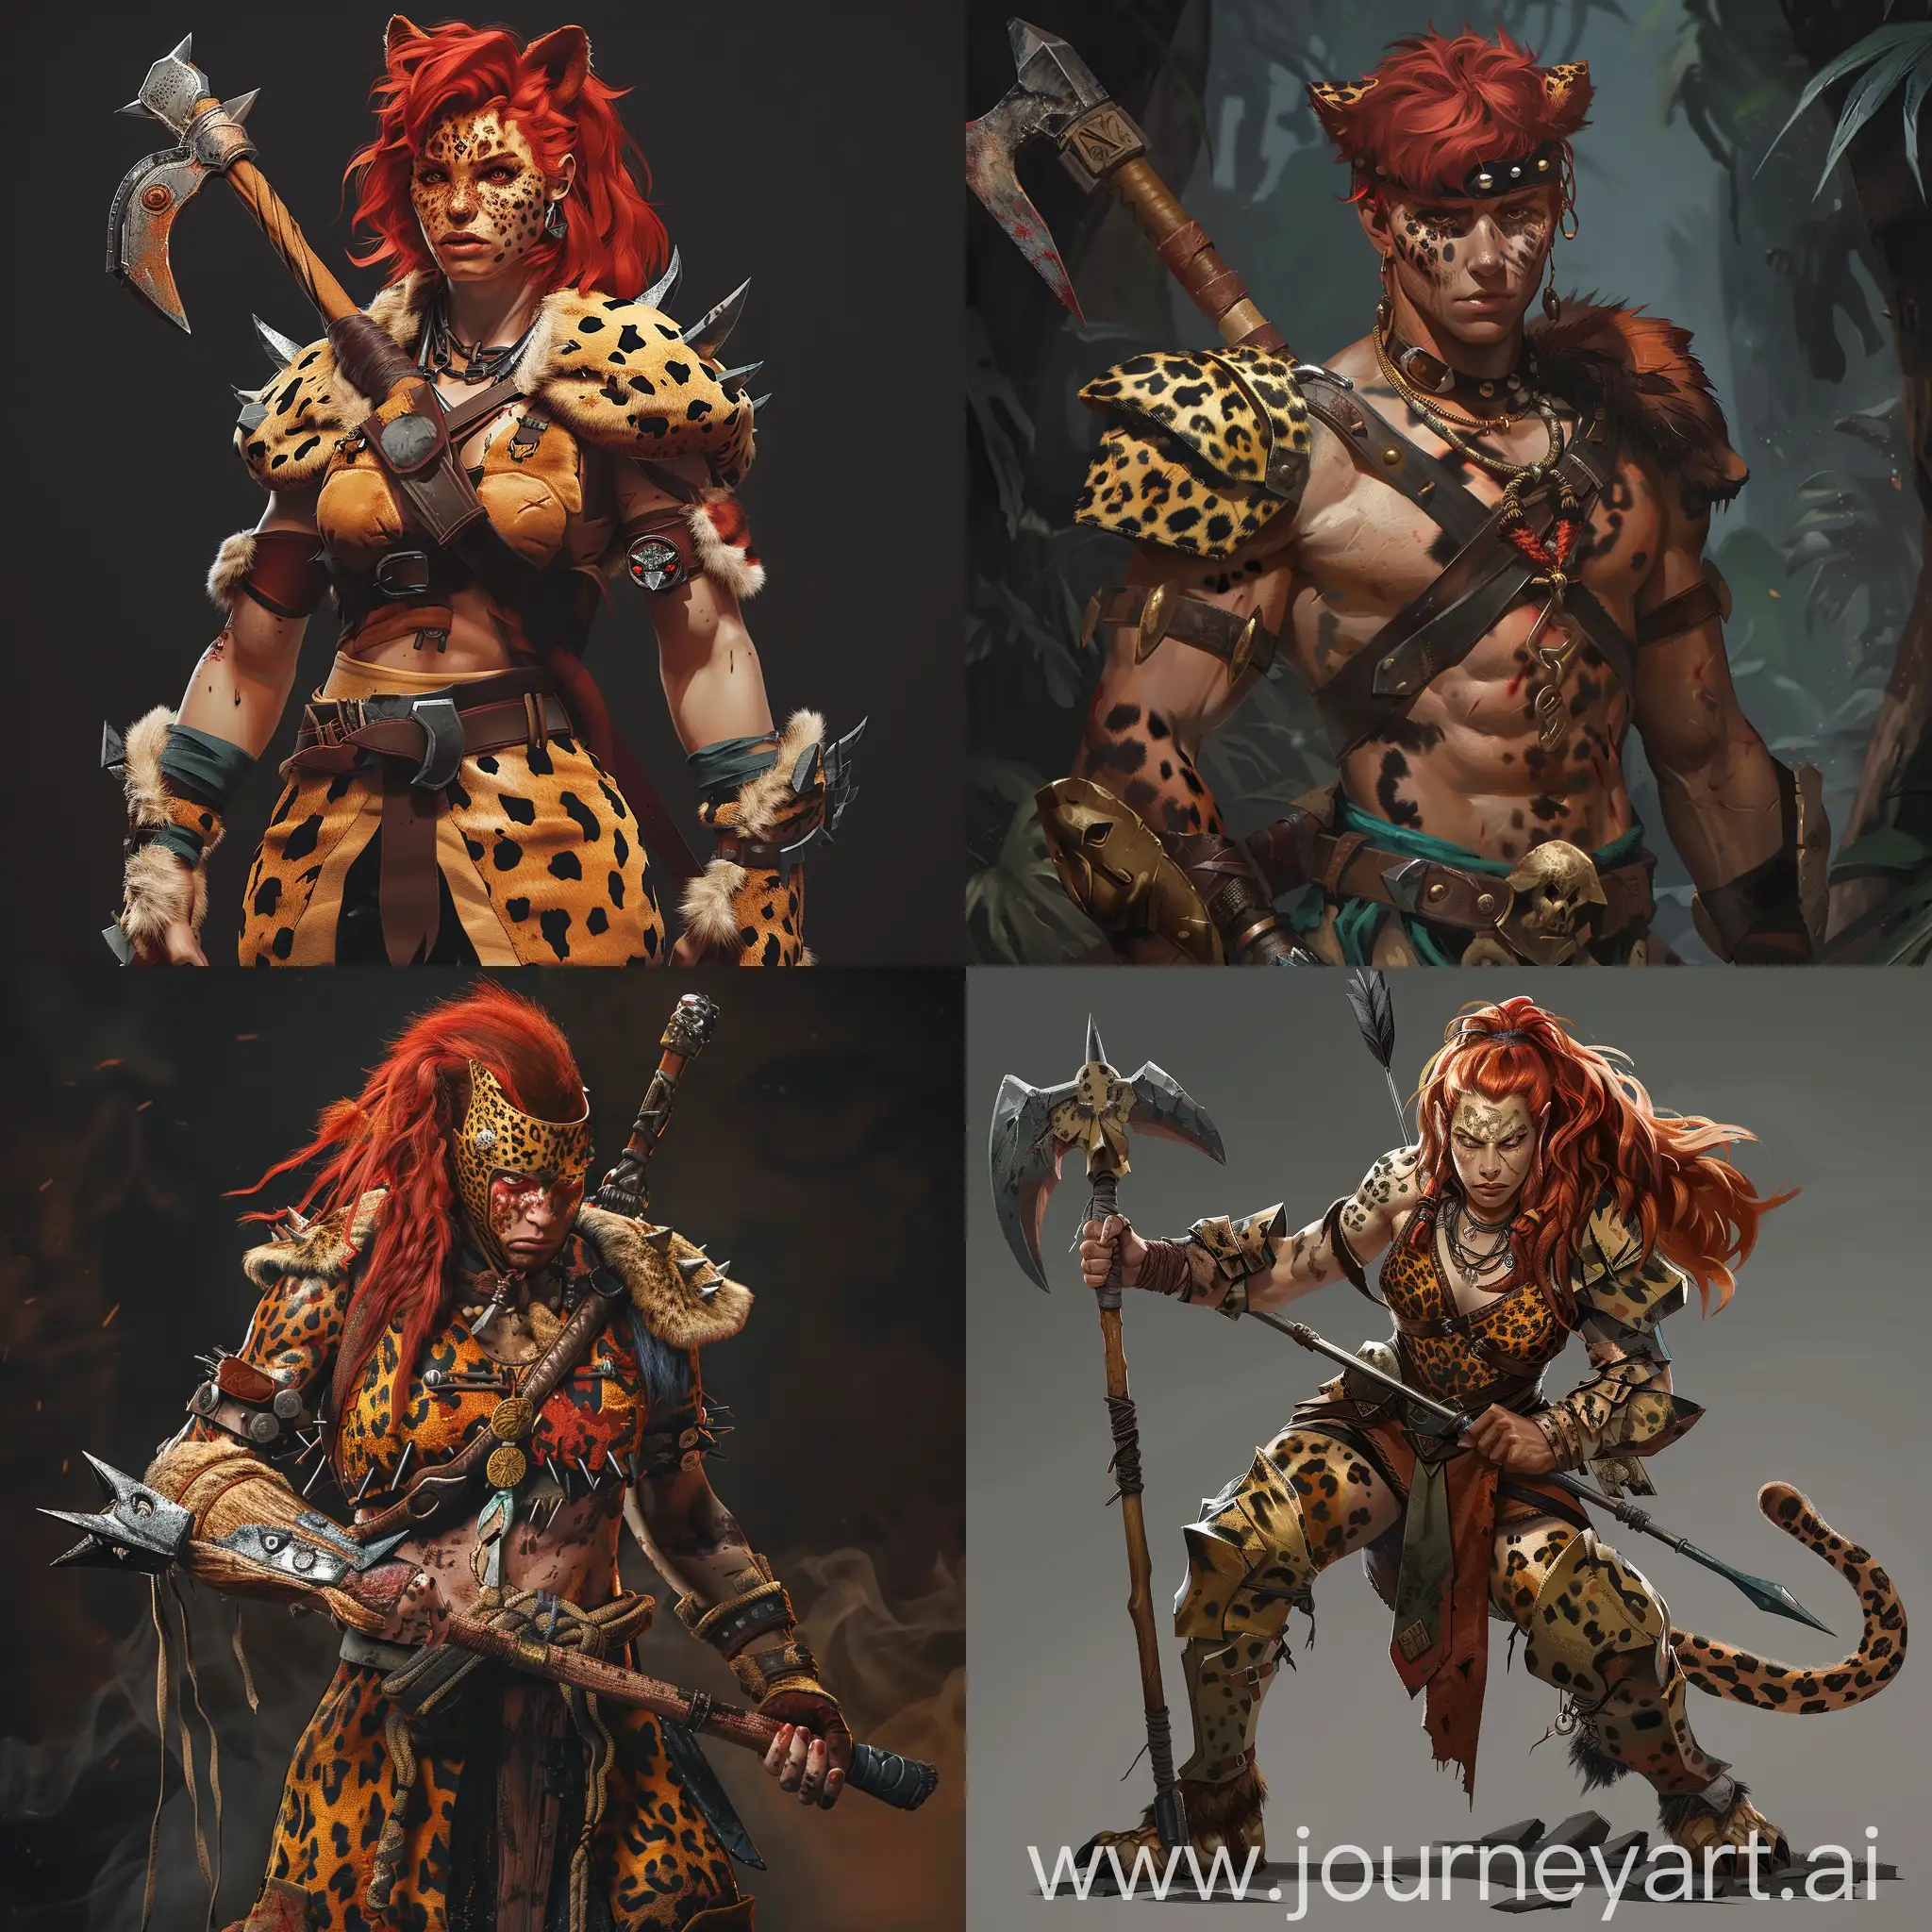 A red-haired, physically trained and sturdy warrior in leopard armor with a striking, intimidating melee weapon similar to a pickaxe,
more details, 4k, realism